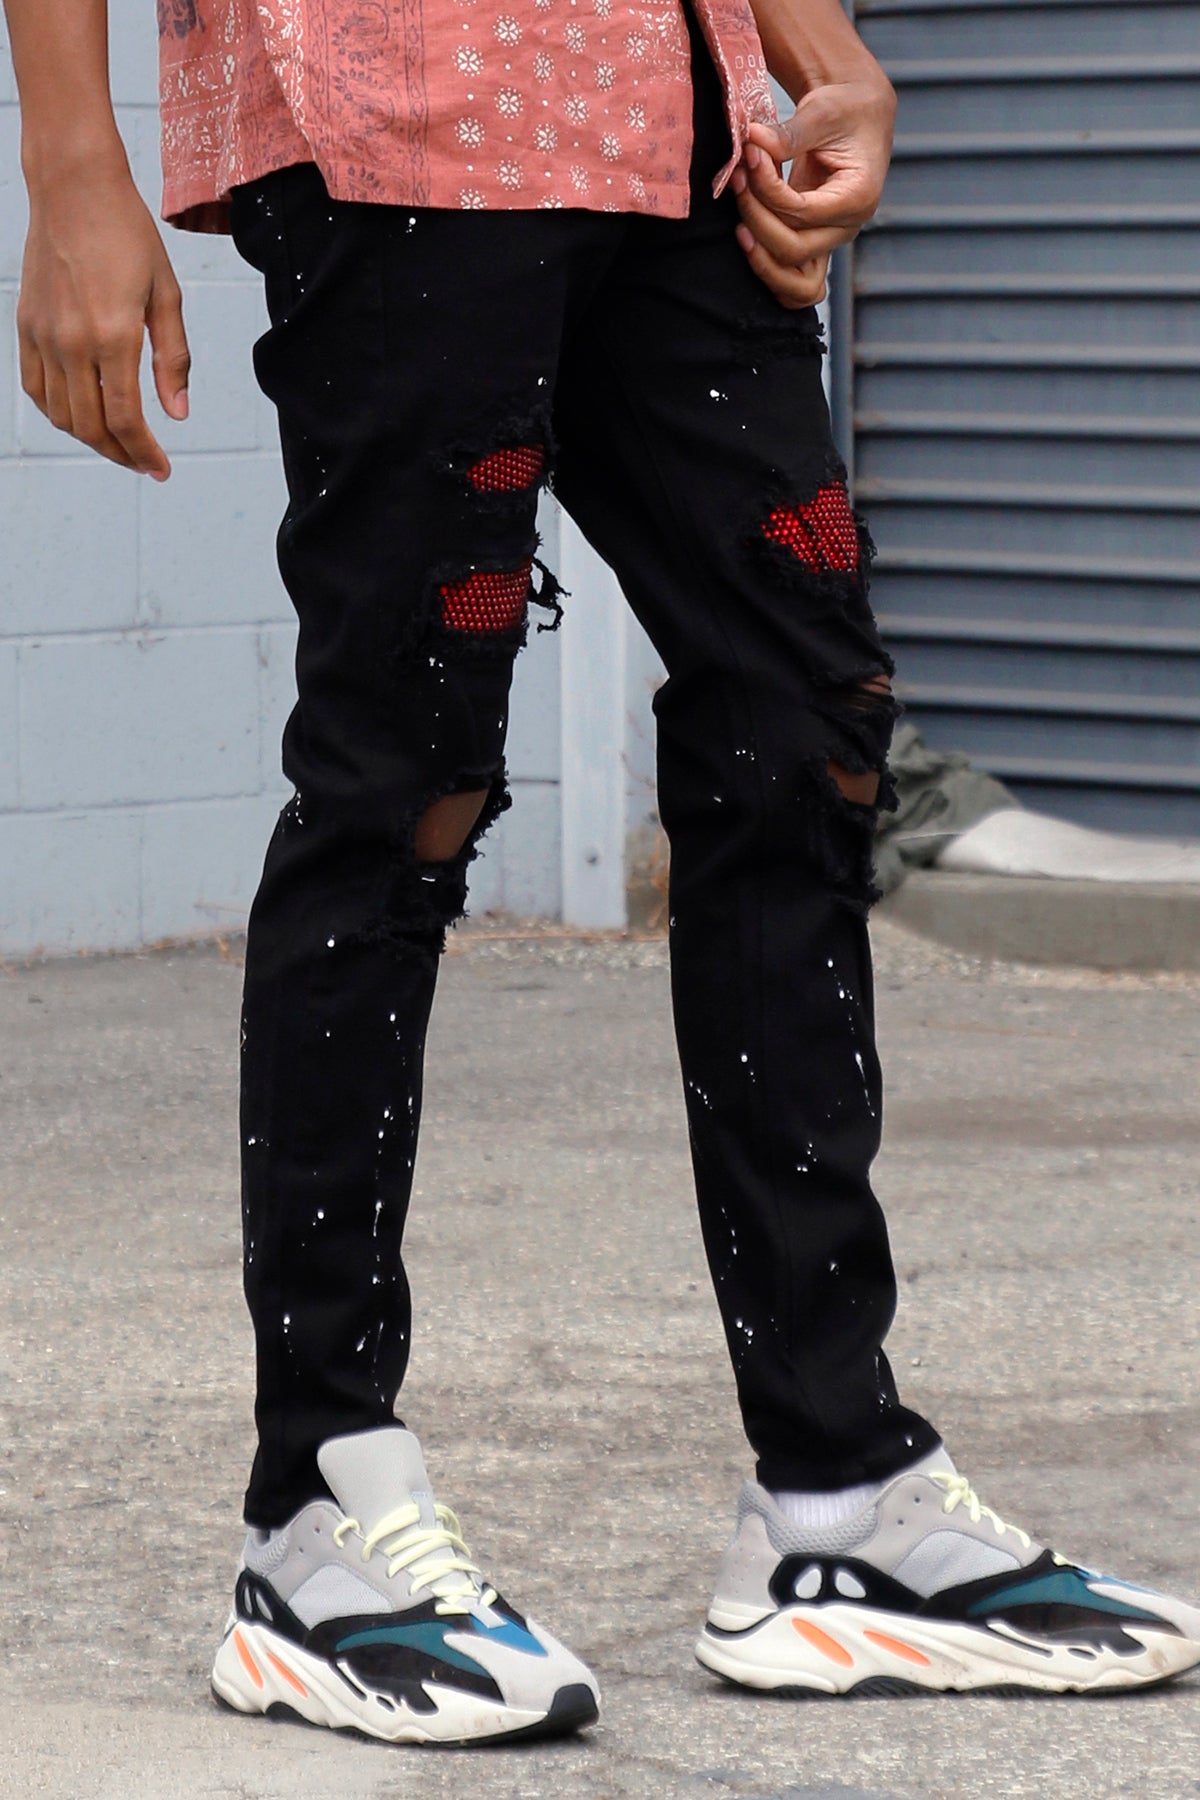 Red Rhinestones Patched Twill Pants (Black) (6544658956390)